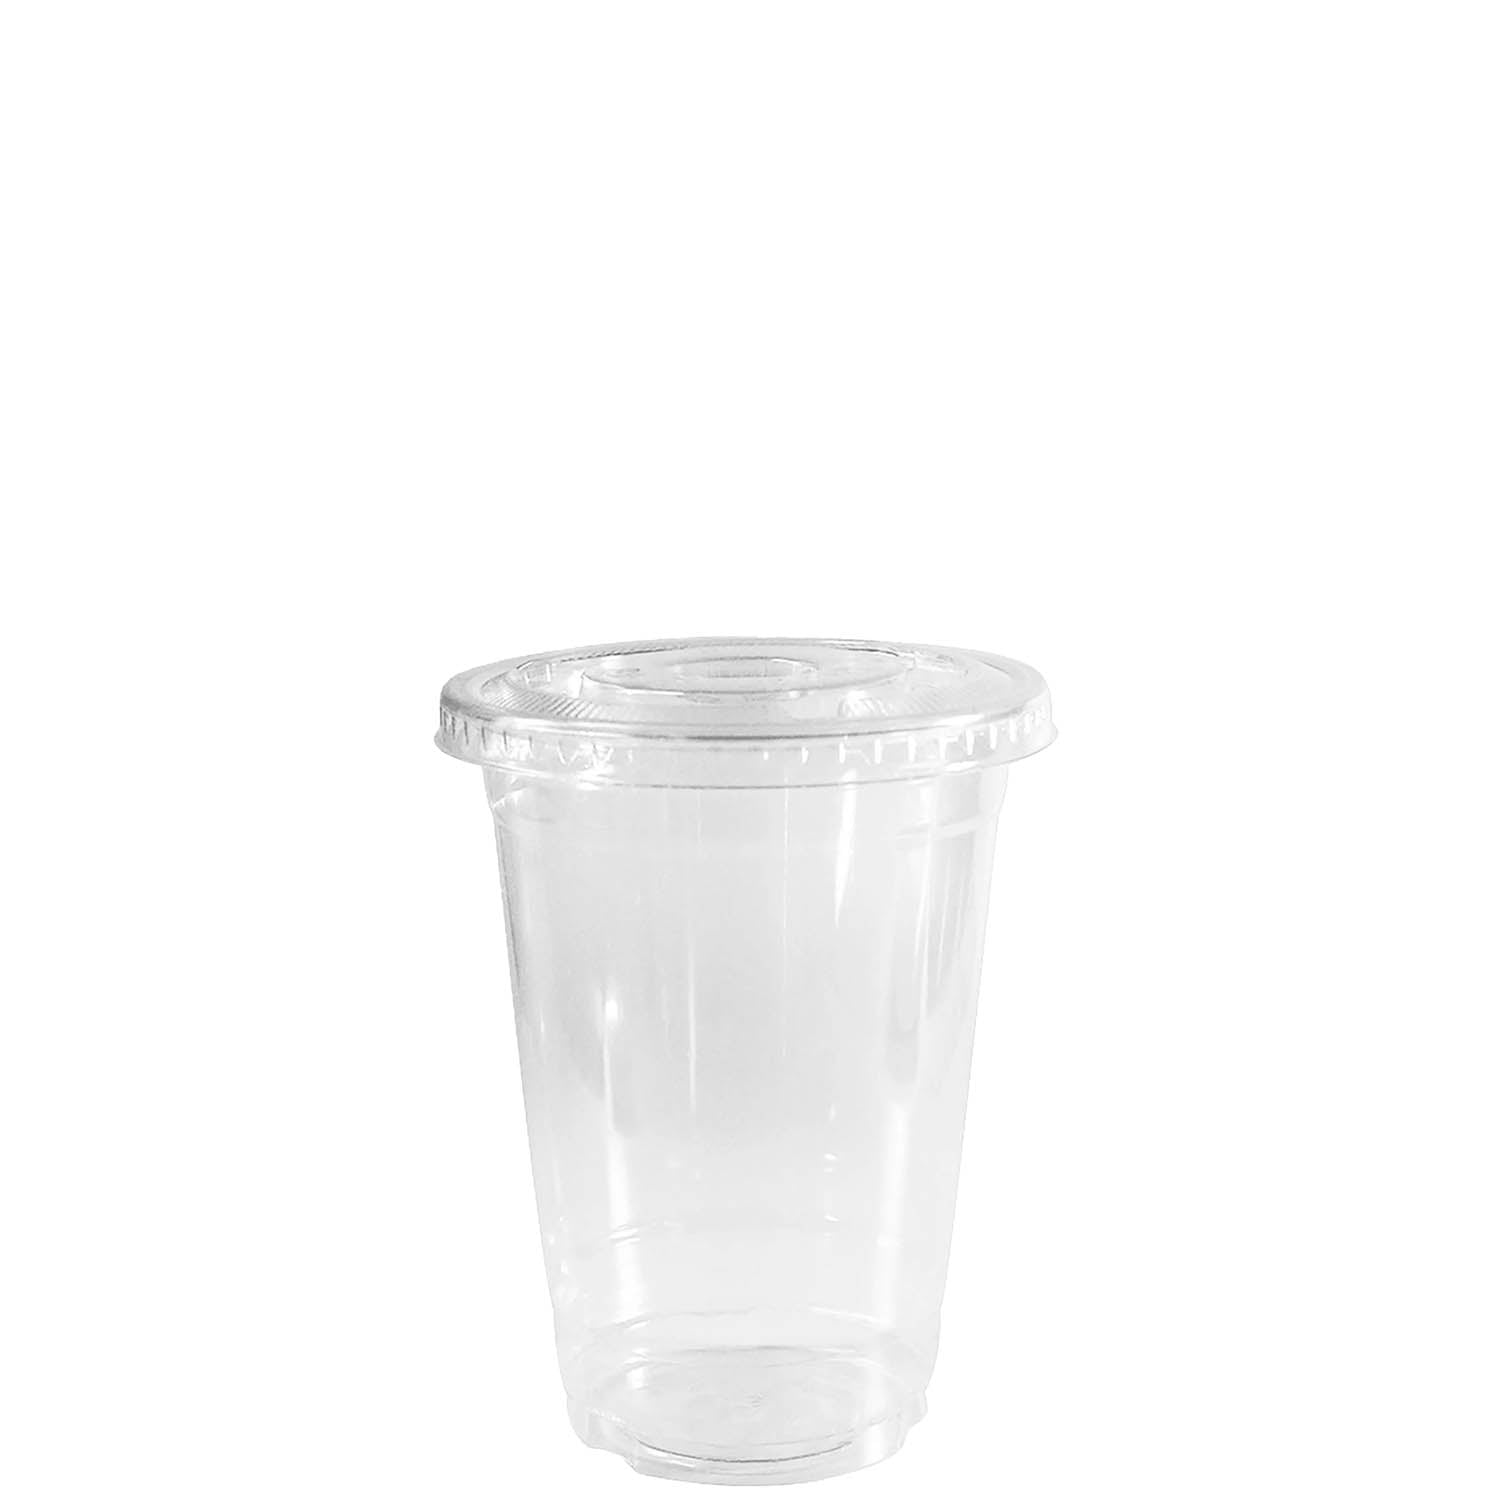 Ocean Friends Cup - 250 Cup/Lid/Straw (250 units)